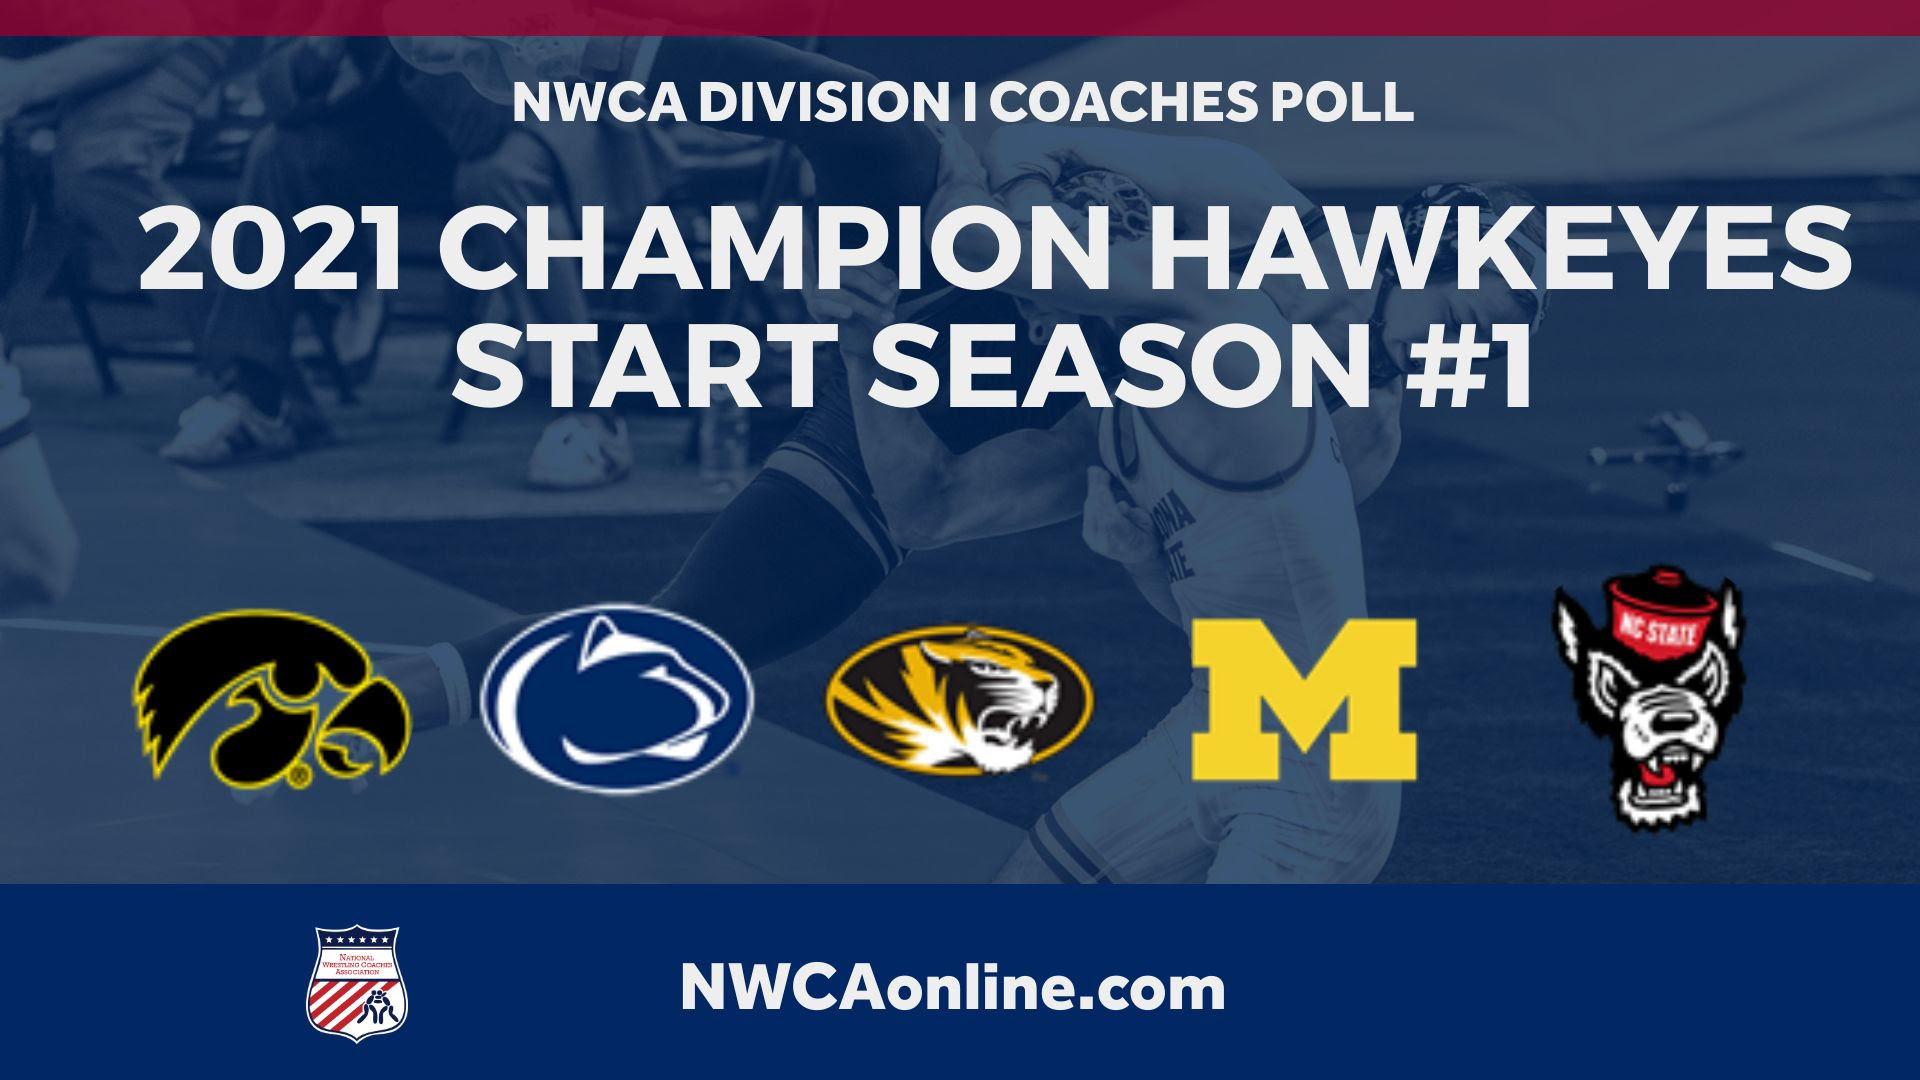 Kicking off: Usual suspects atop first NWCA Division I Coaches Poll of 2021-22 season